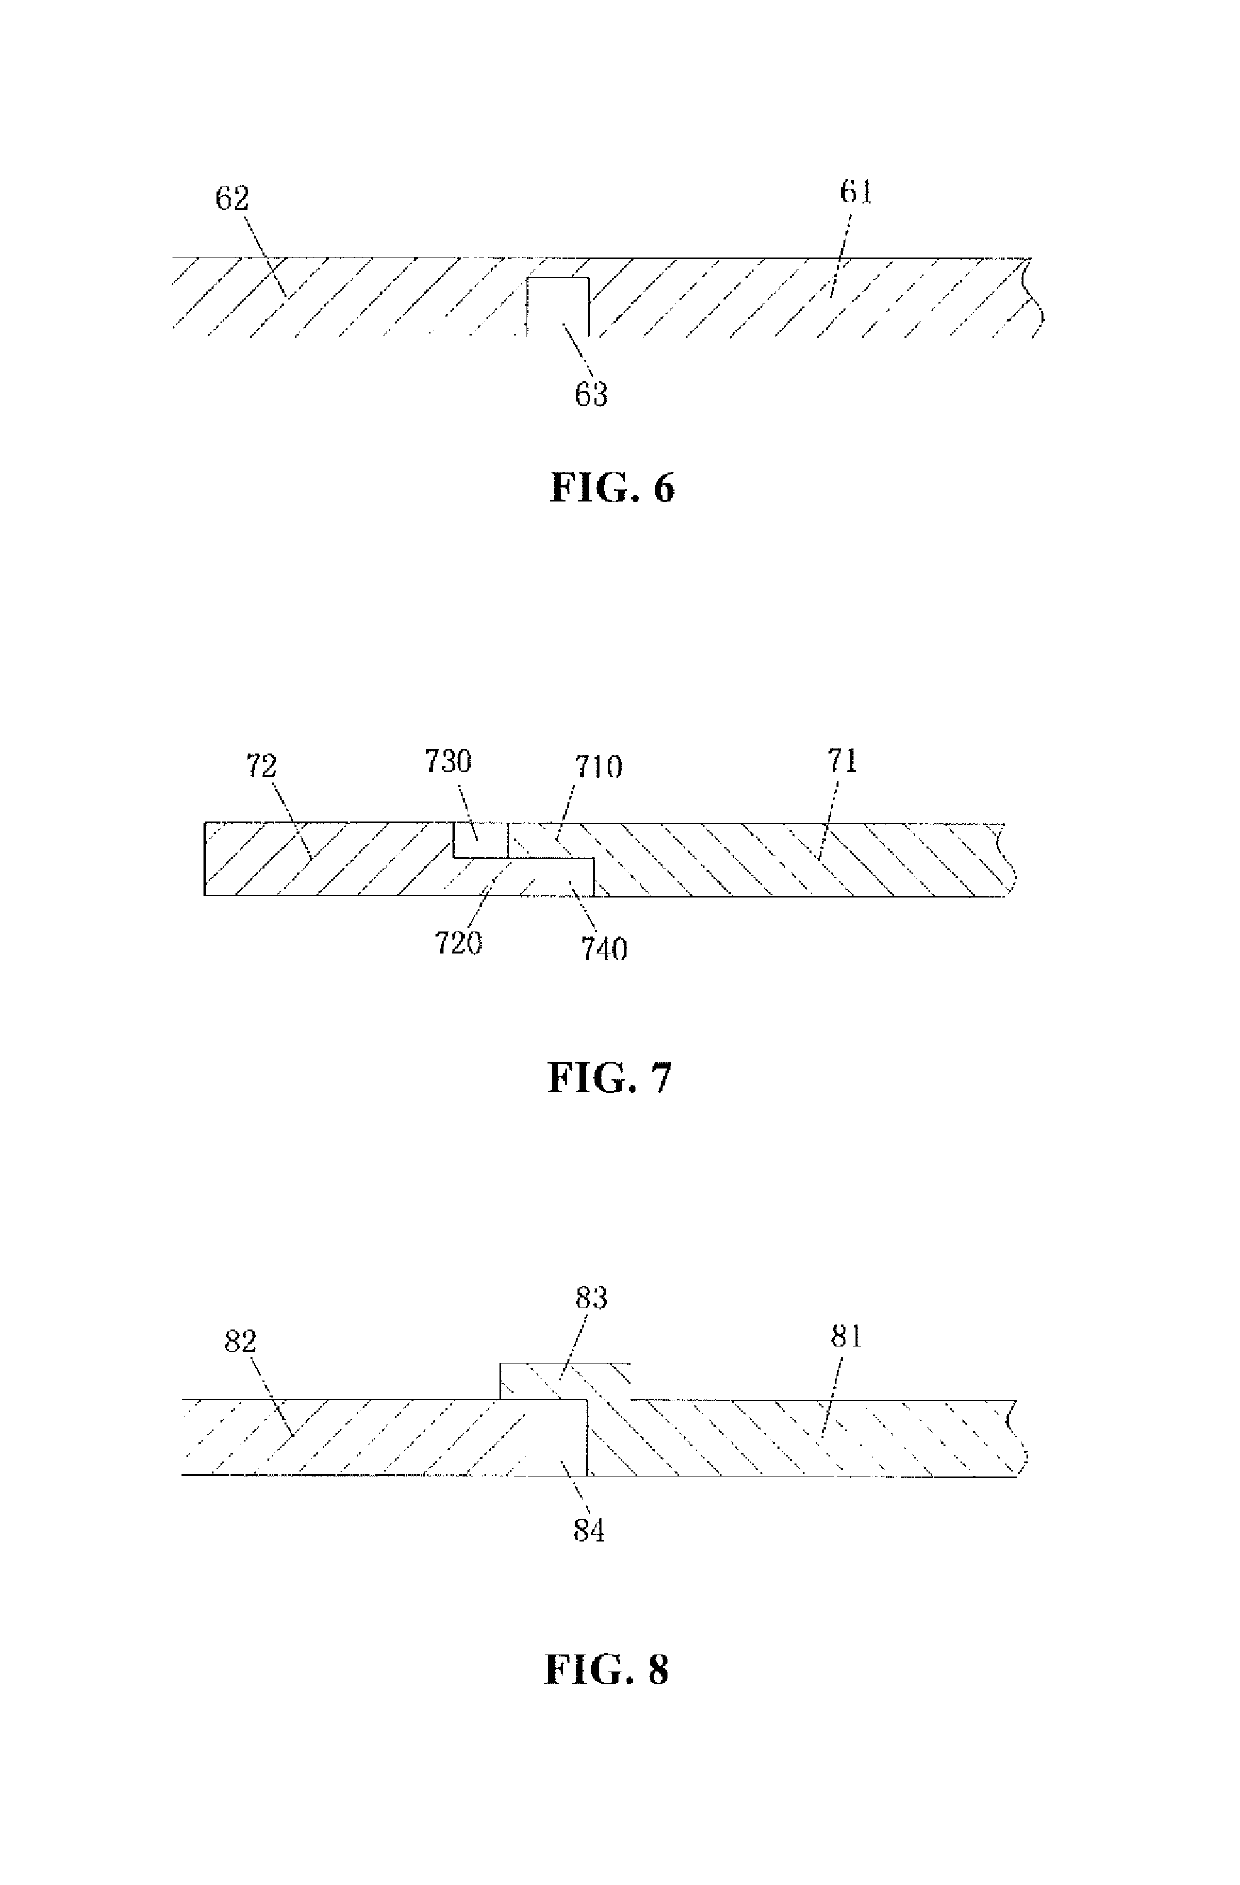 Hot plate and substrate processing equipment using the same